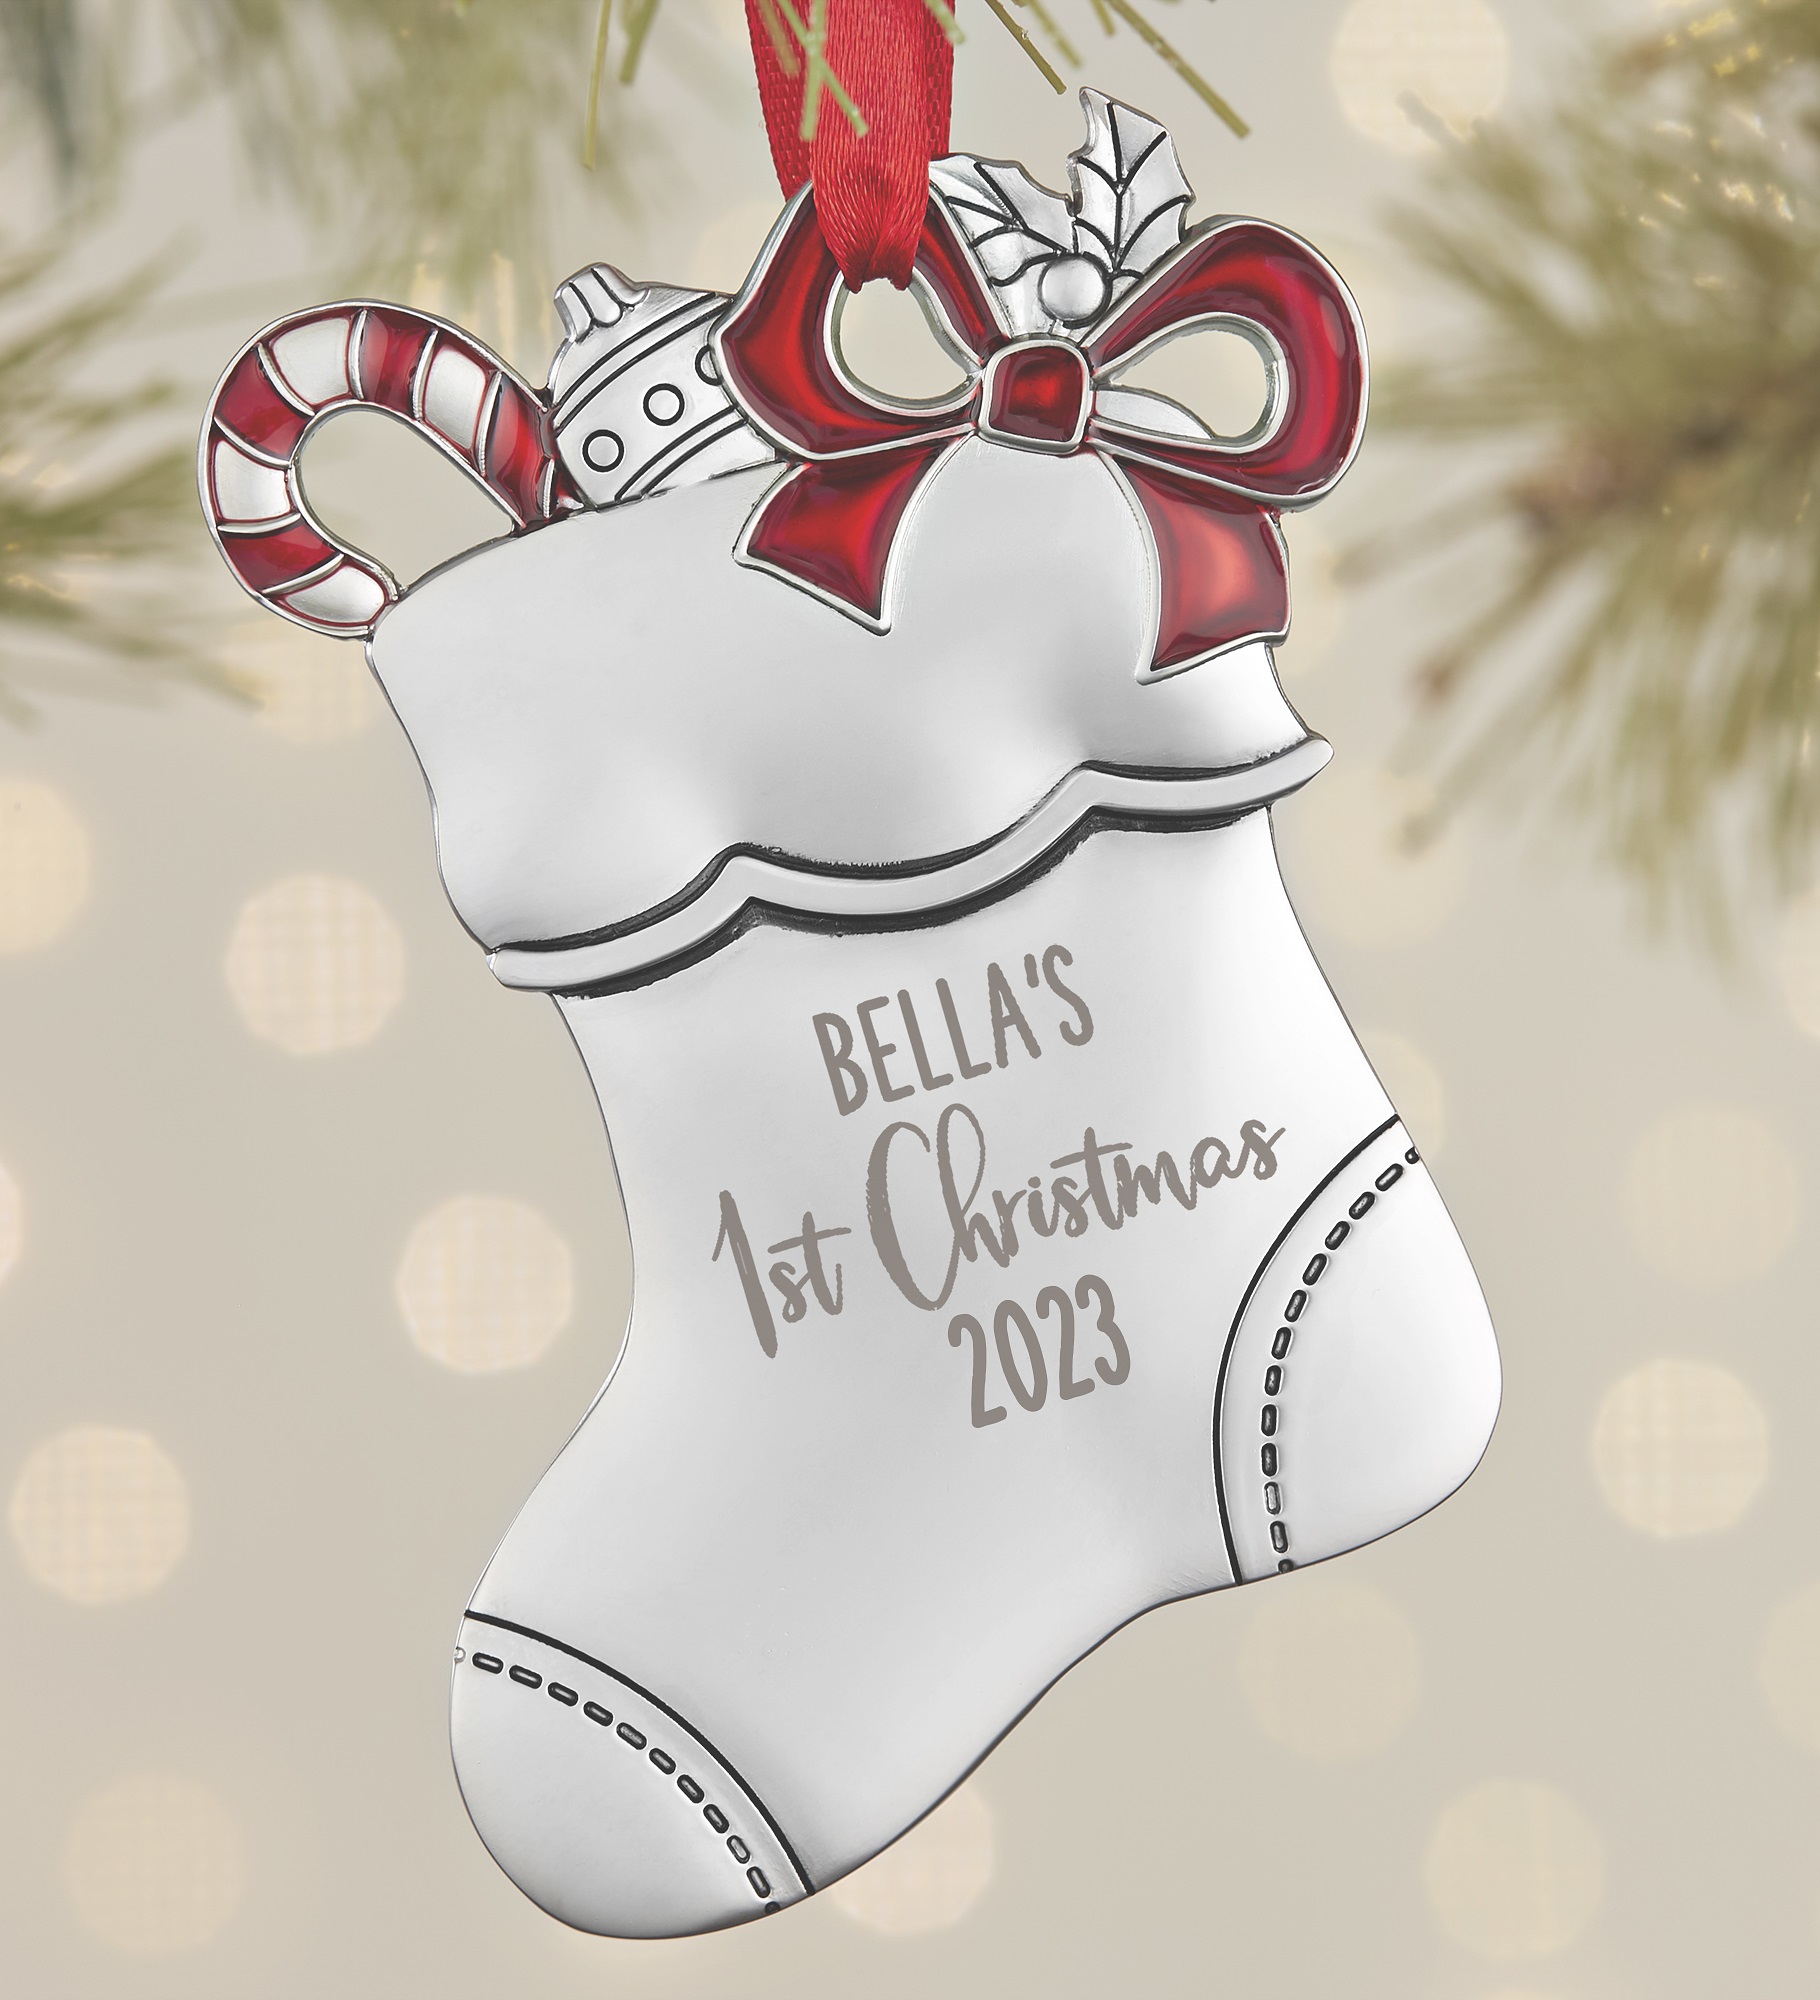 Baby's 1st Christmas Personalized Silver Stocking Ornament